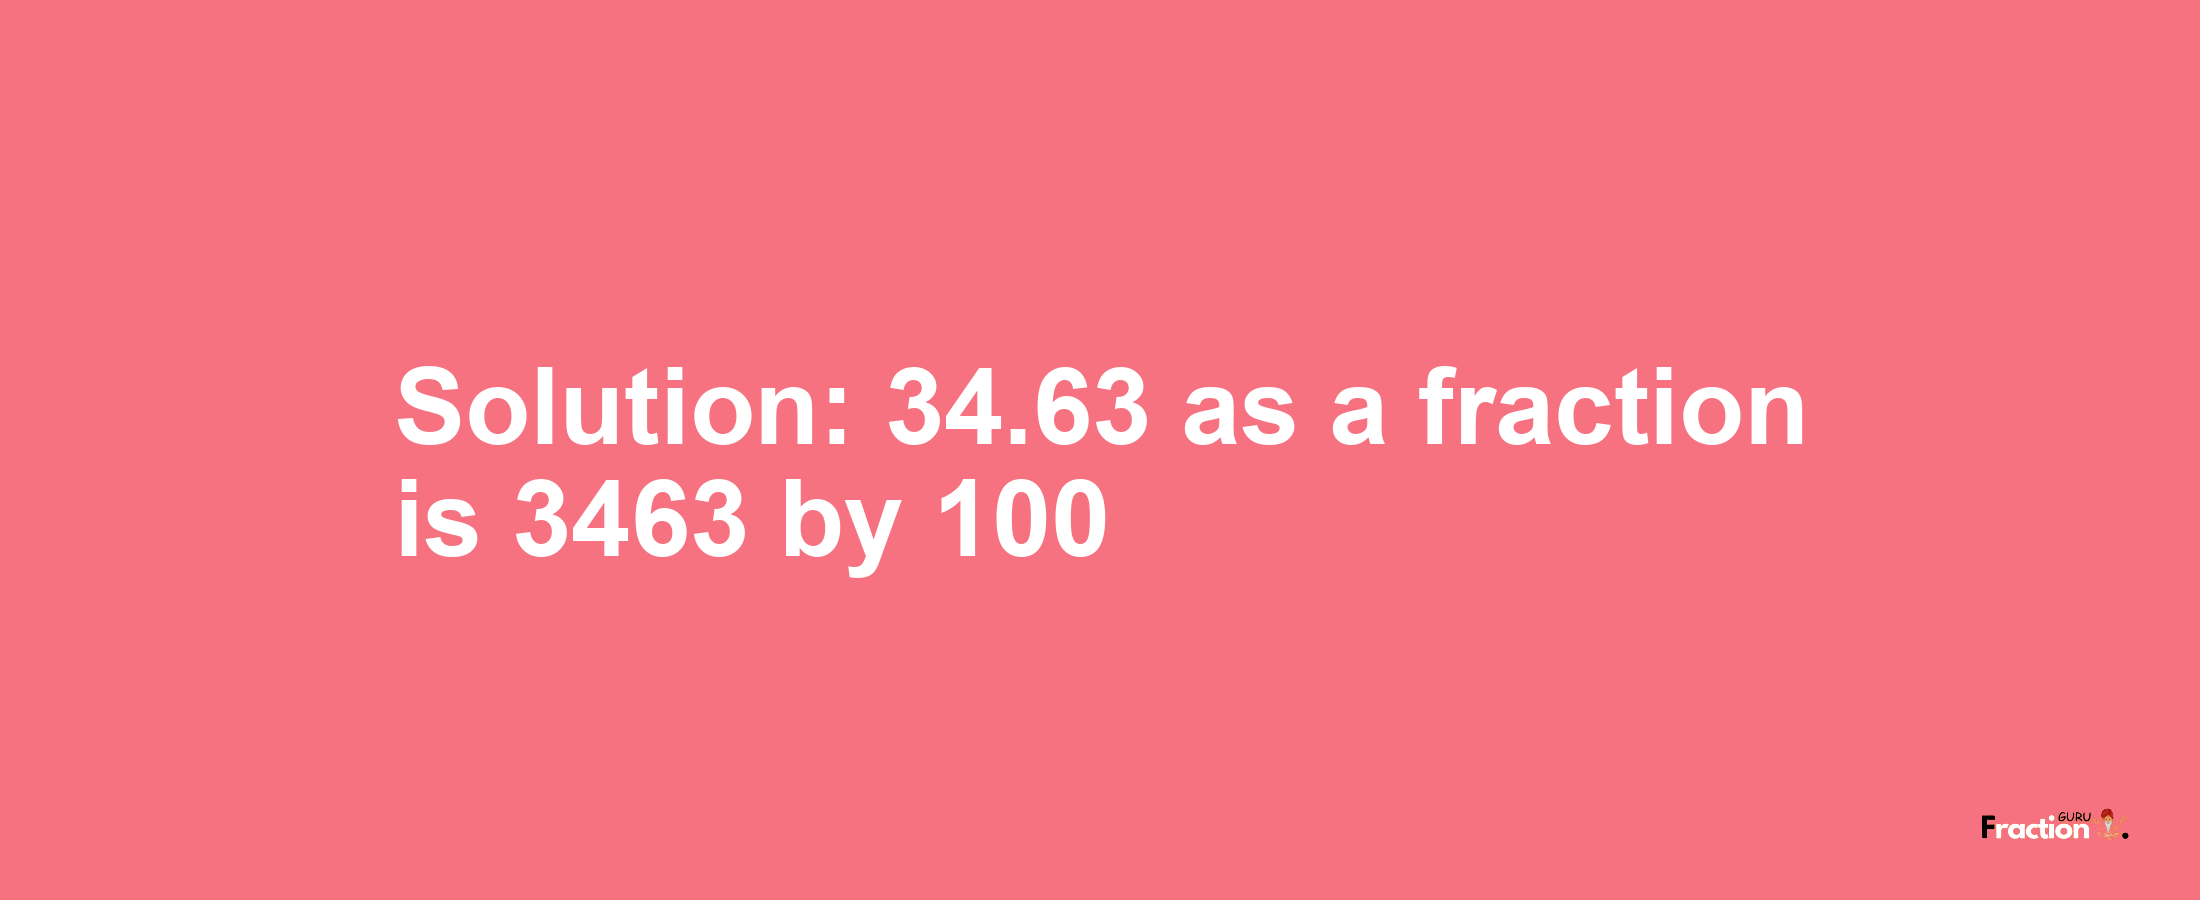 Solution:34.63 as a fraction is 3463/100